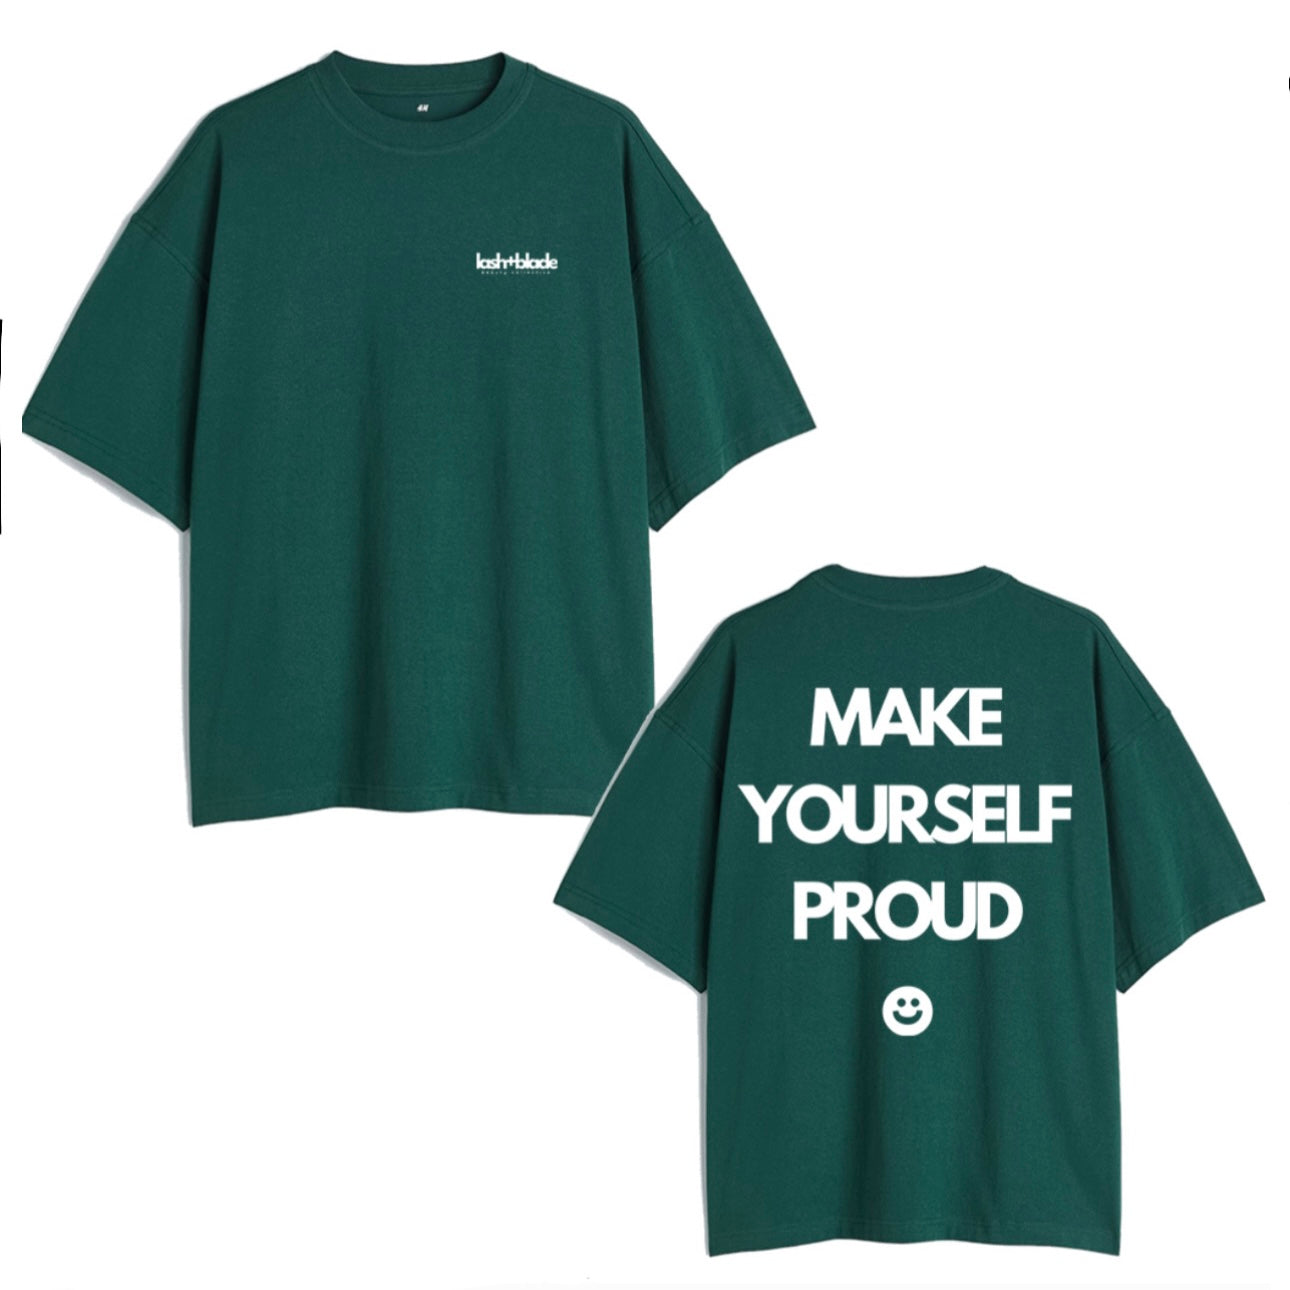 MAKE YOURSELF PROUD T